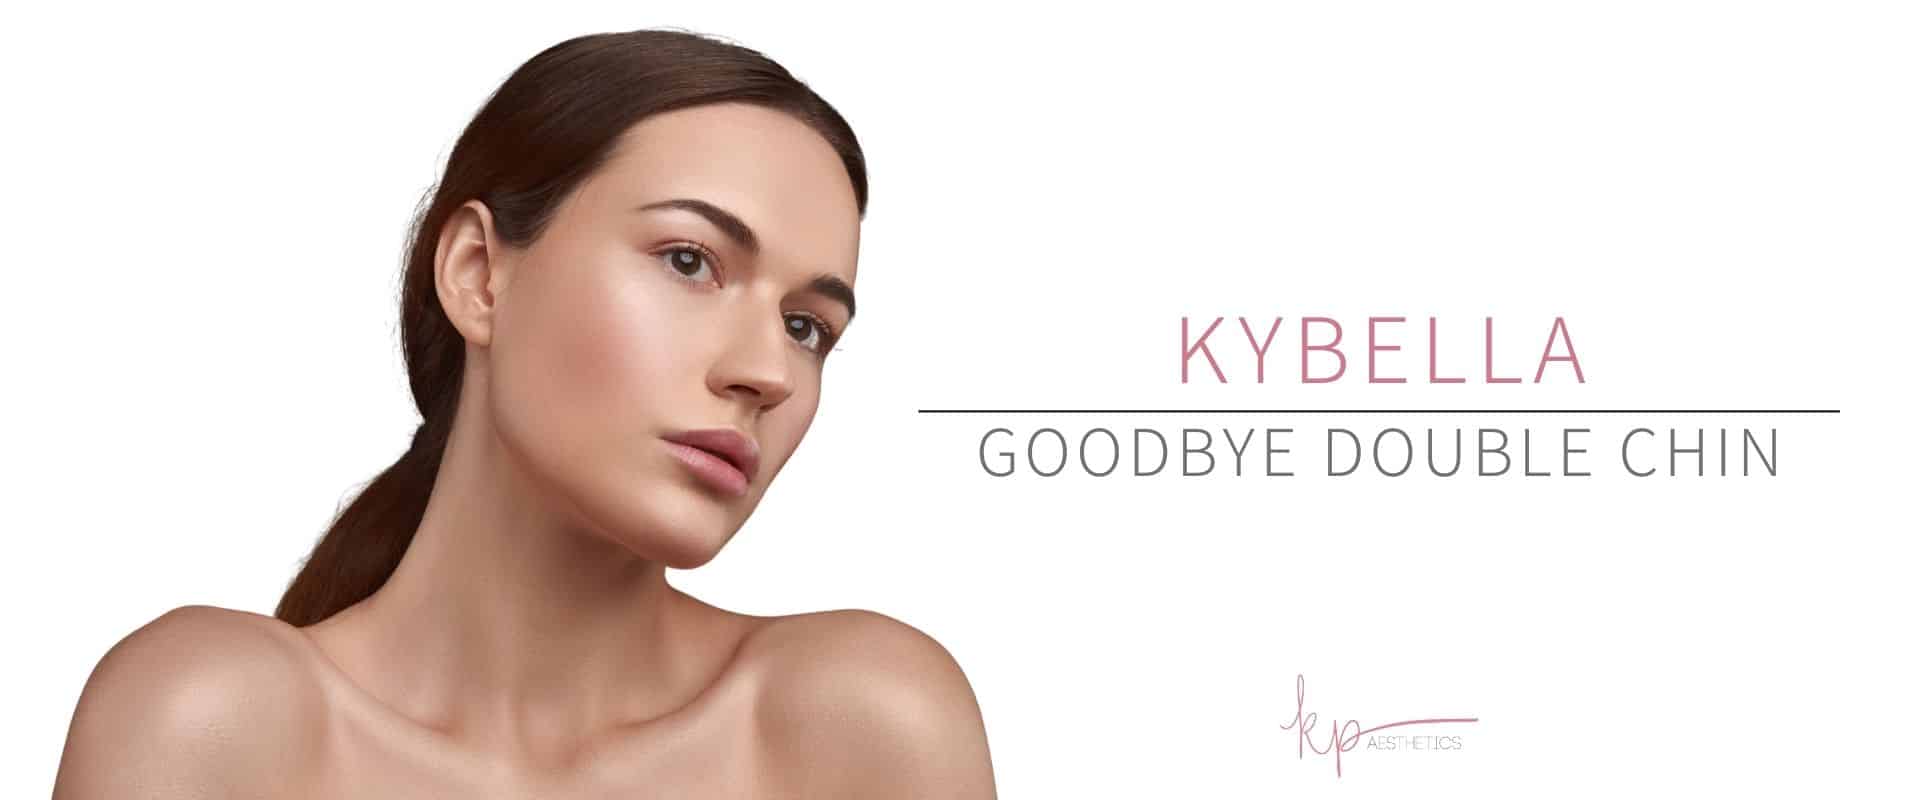 Woman after kybella treatment for double chin at kp aesthetics.